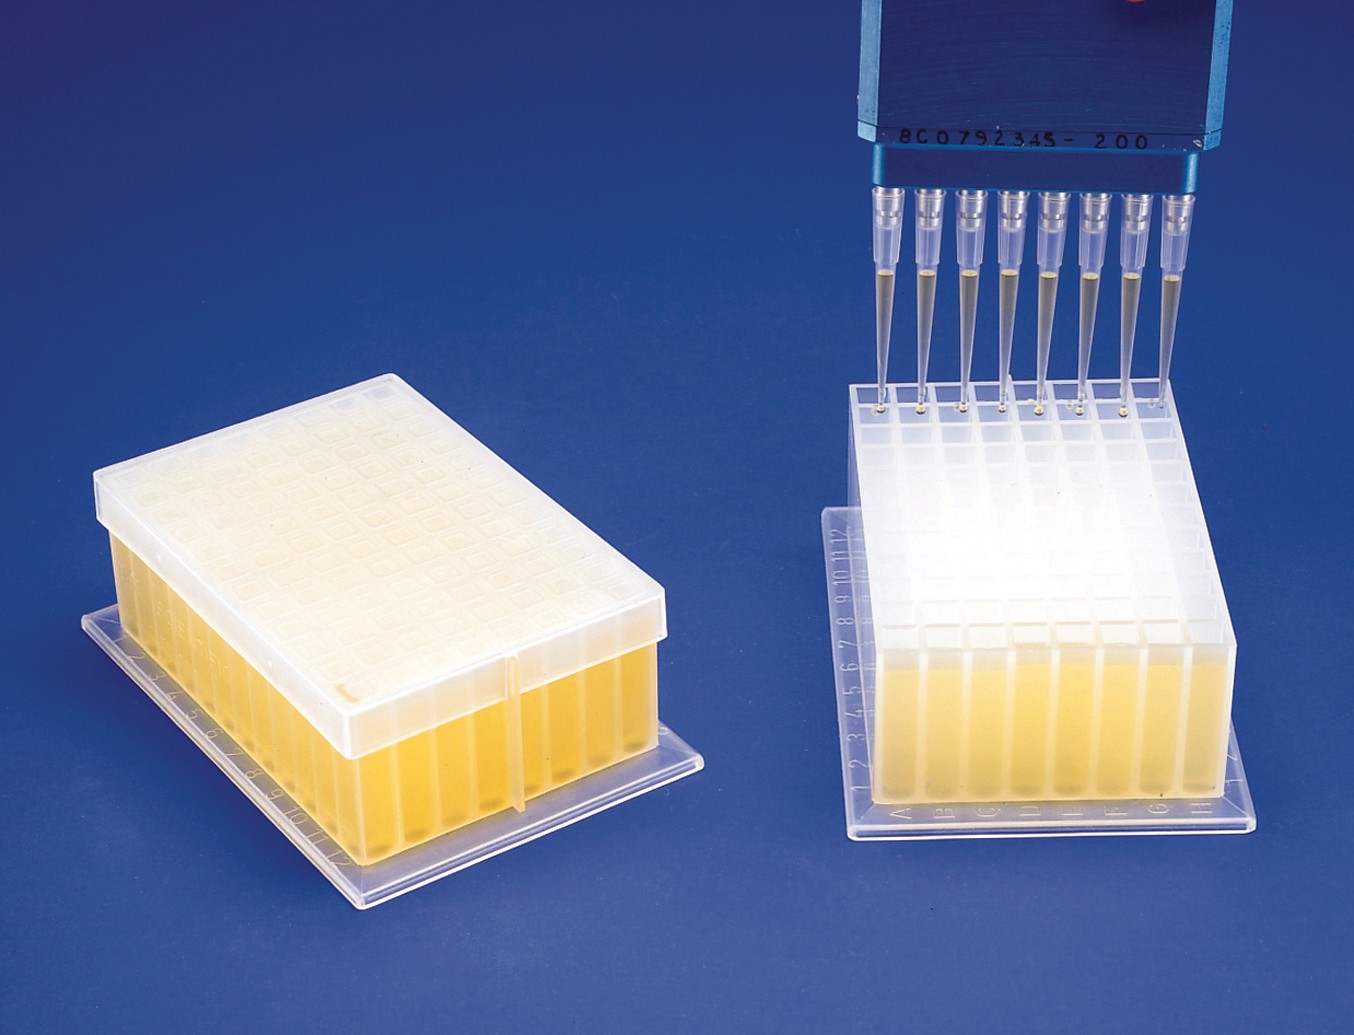 SP Bel-Art Deep-Well Plate; Sterile, 96 Places, 2ml, Plastic, 5 x 3⅜ x 1⅝ in. (Pack of 24)